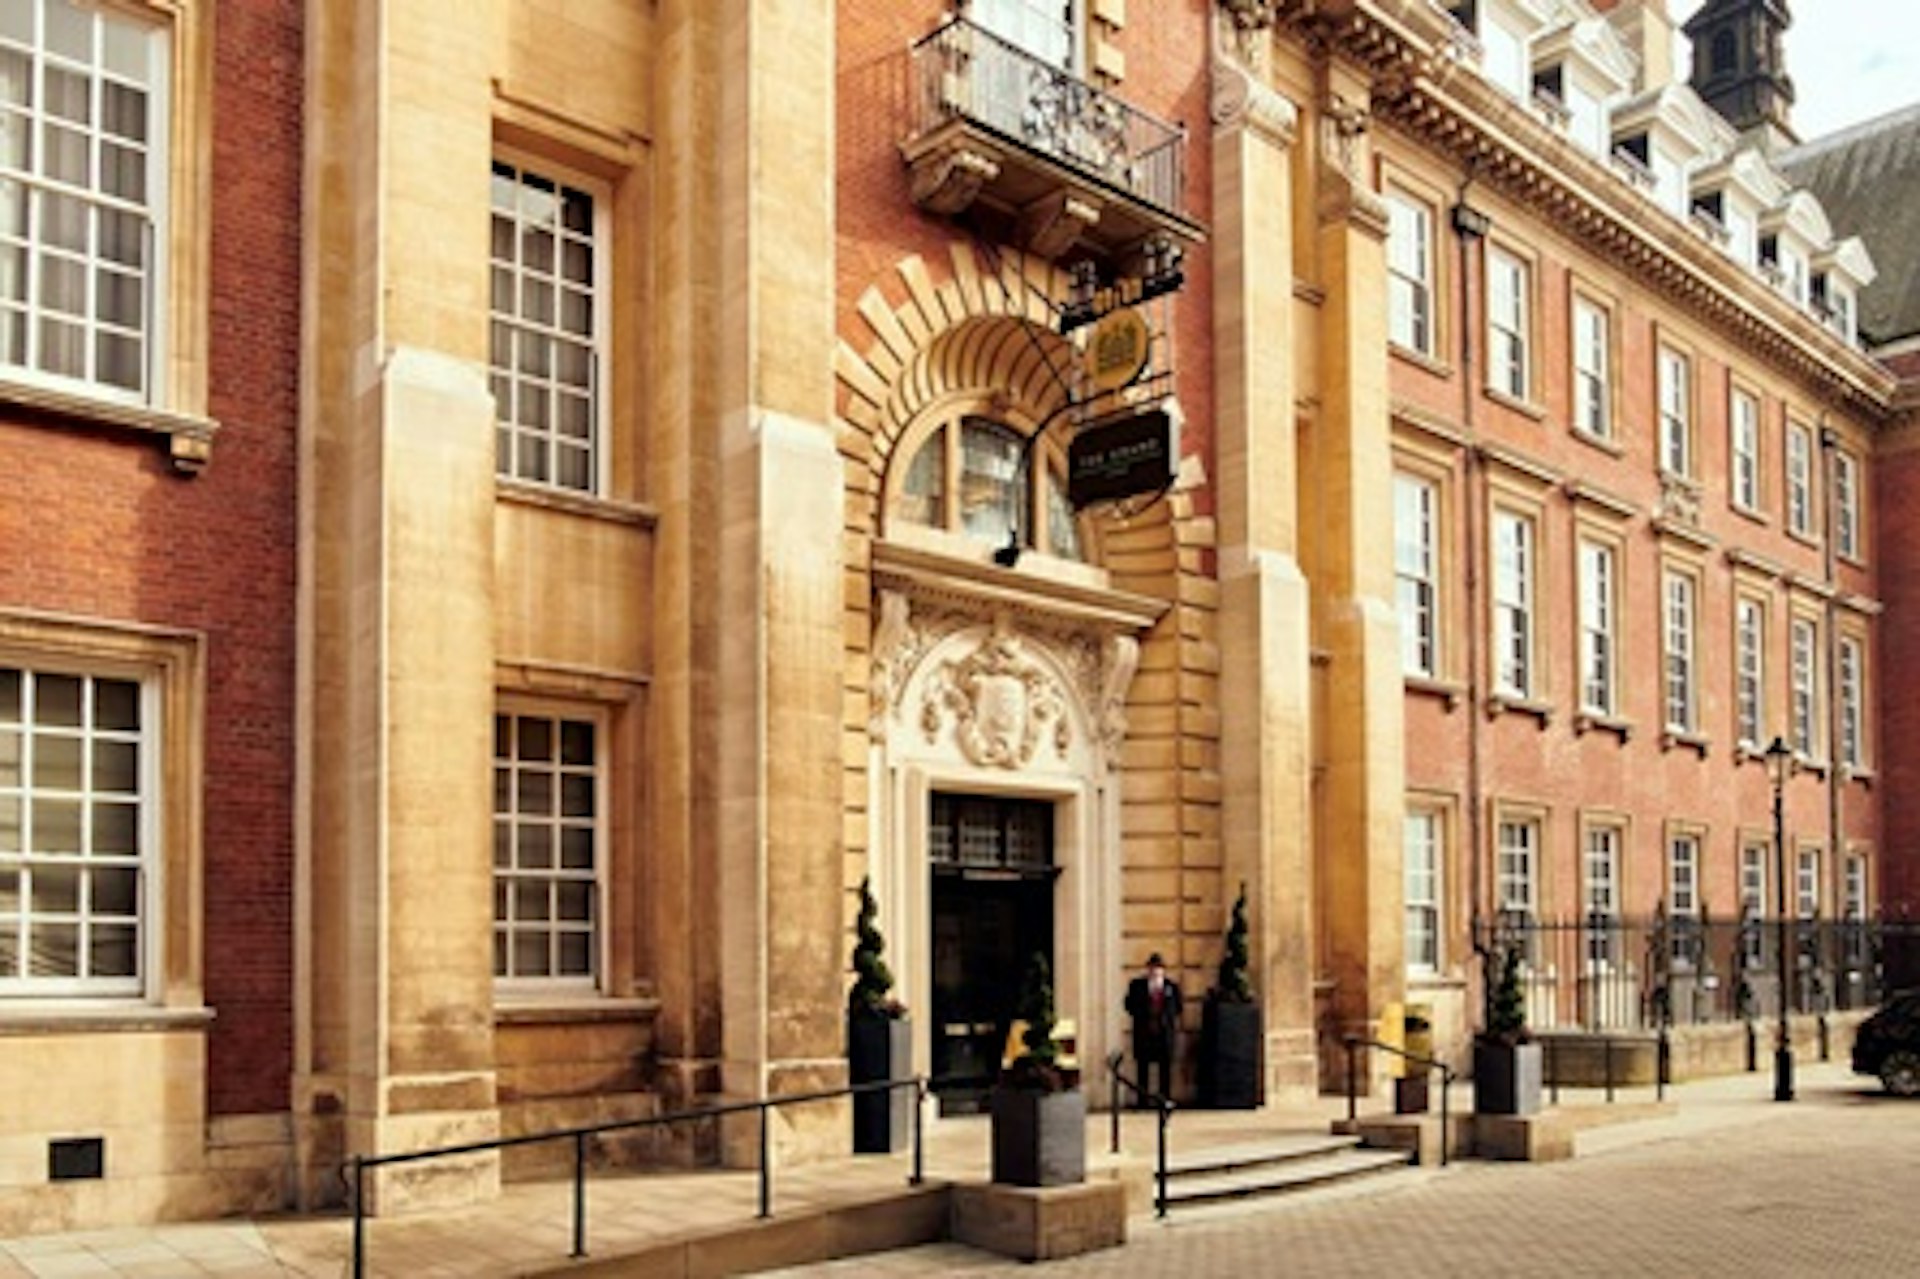 One Night Luxury Break for Two at the 5* Grand, York 2